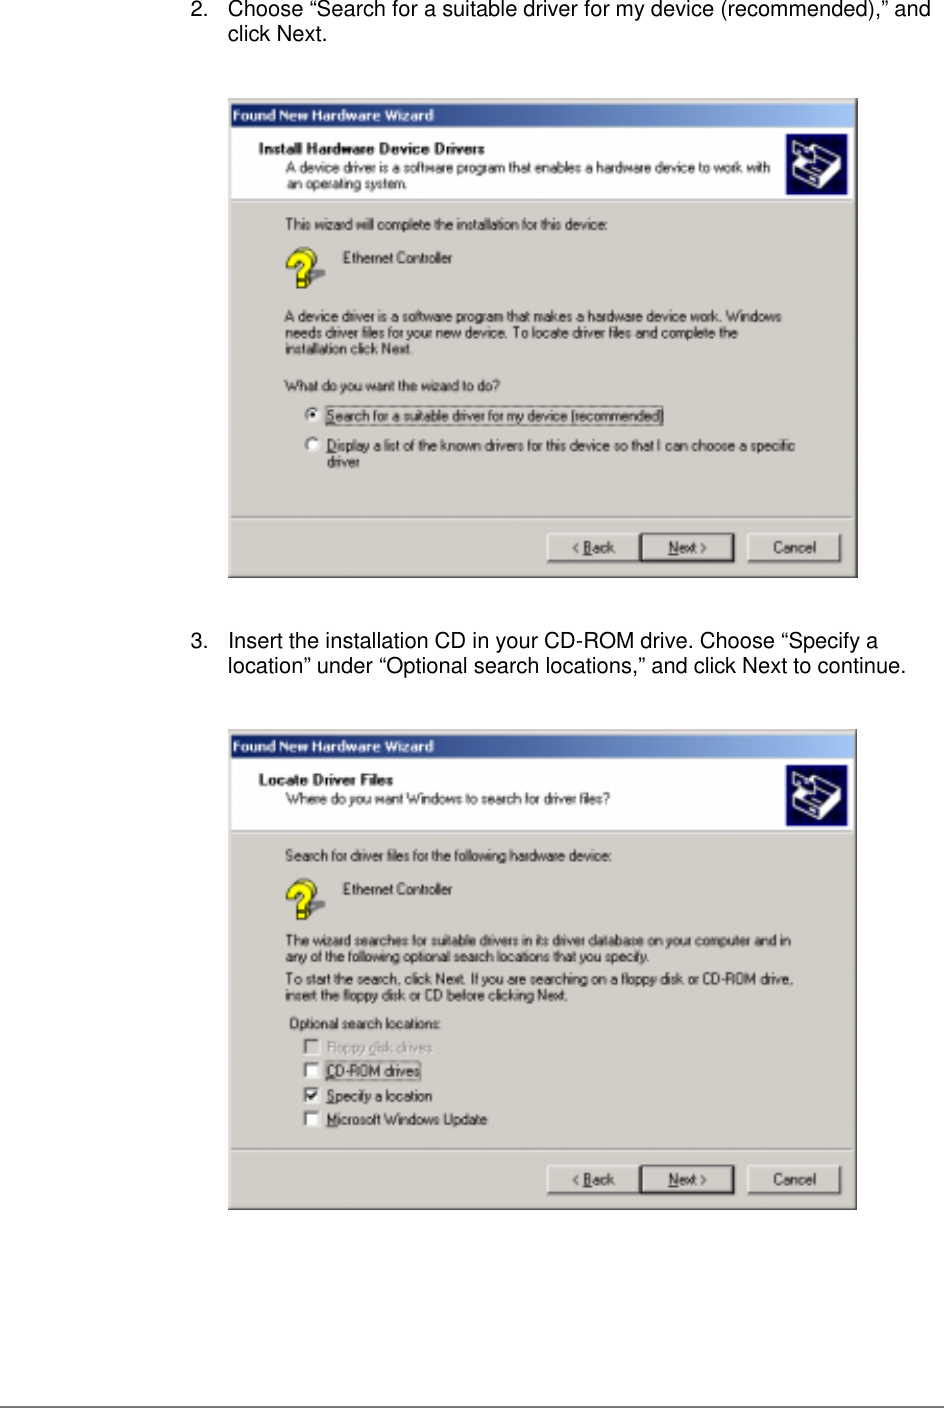 2.  Choose “Search for a suitable driver for my device (recommended),” andclick Next.3.  Insert the installation CD in your CD-ROM drive. Choose “Specify alocation” under “Optional search locations,” and click Next to continue.